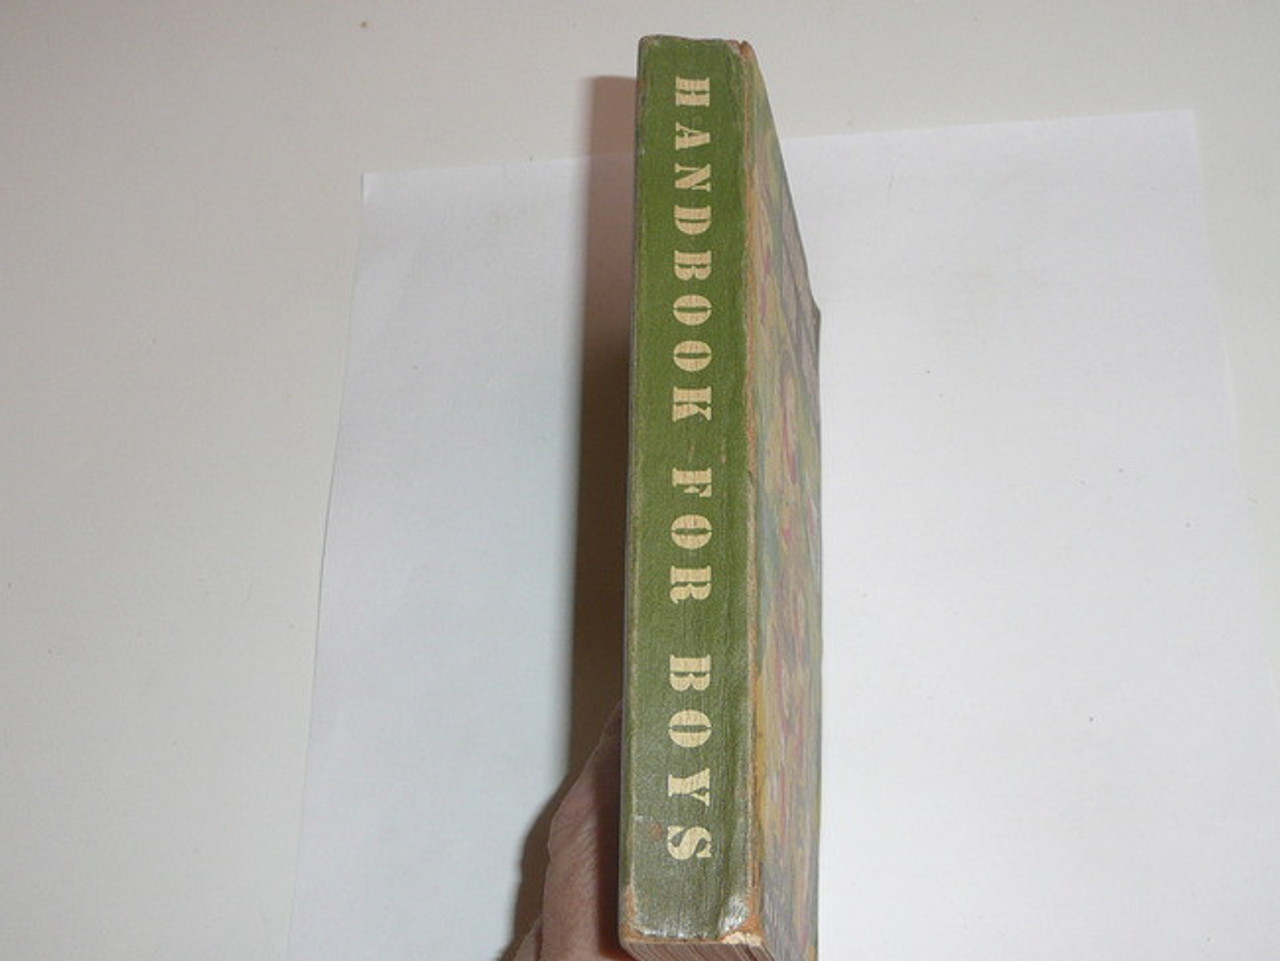 1948 Boy Scout Handbook, Fifth Edition, First Printing, Don Ross Cover Artwork, very good condition, three stars on last page